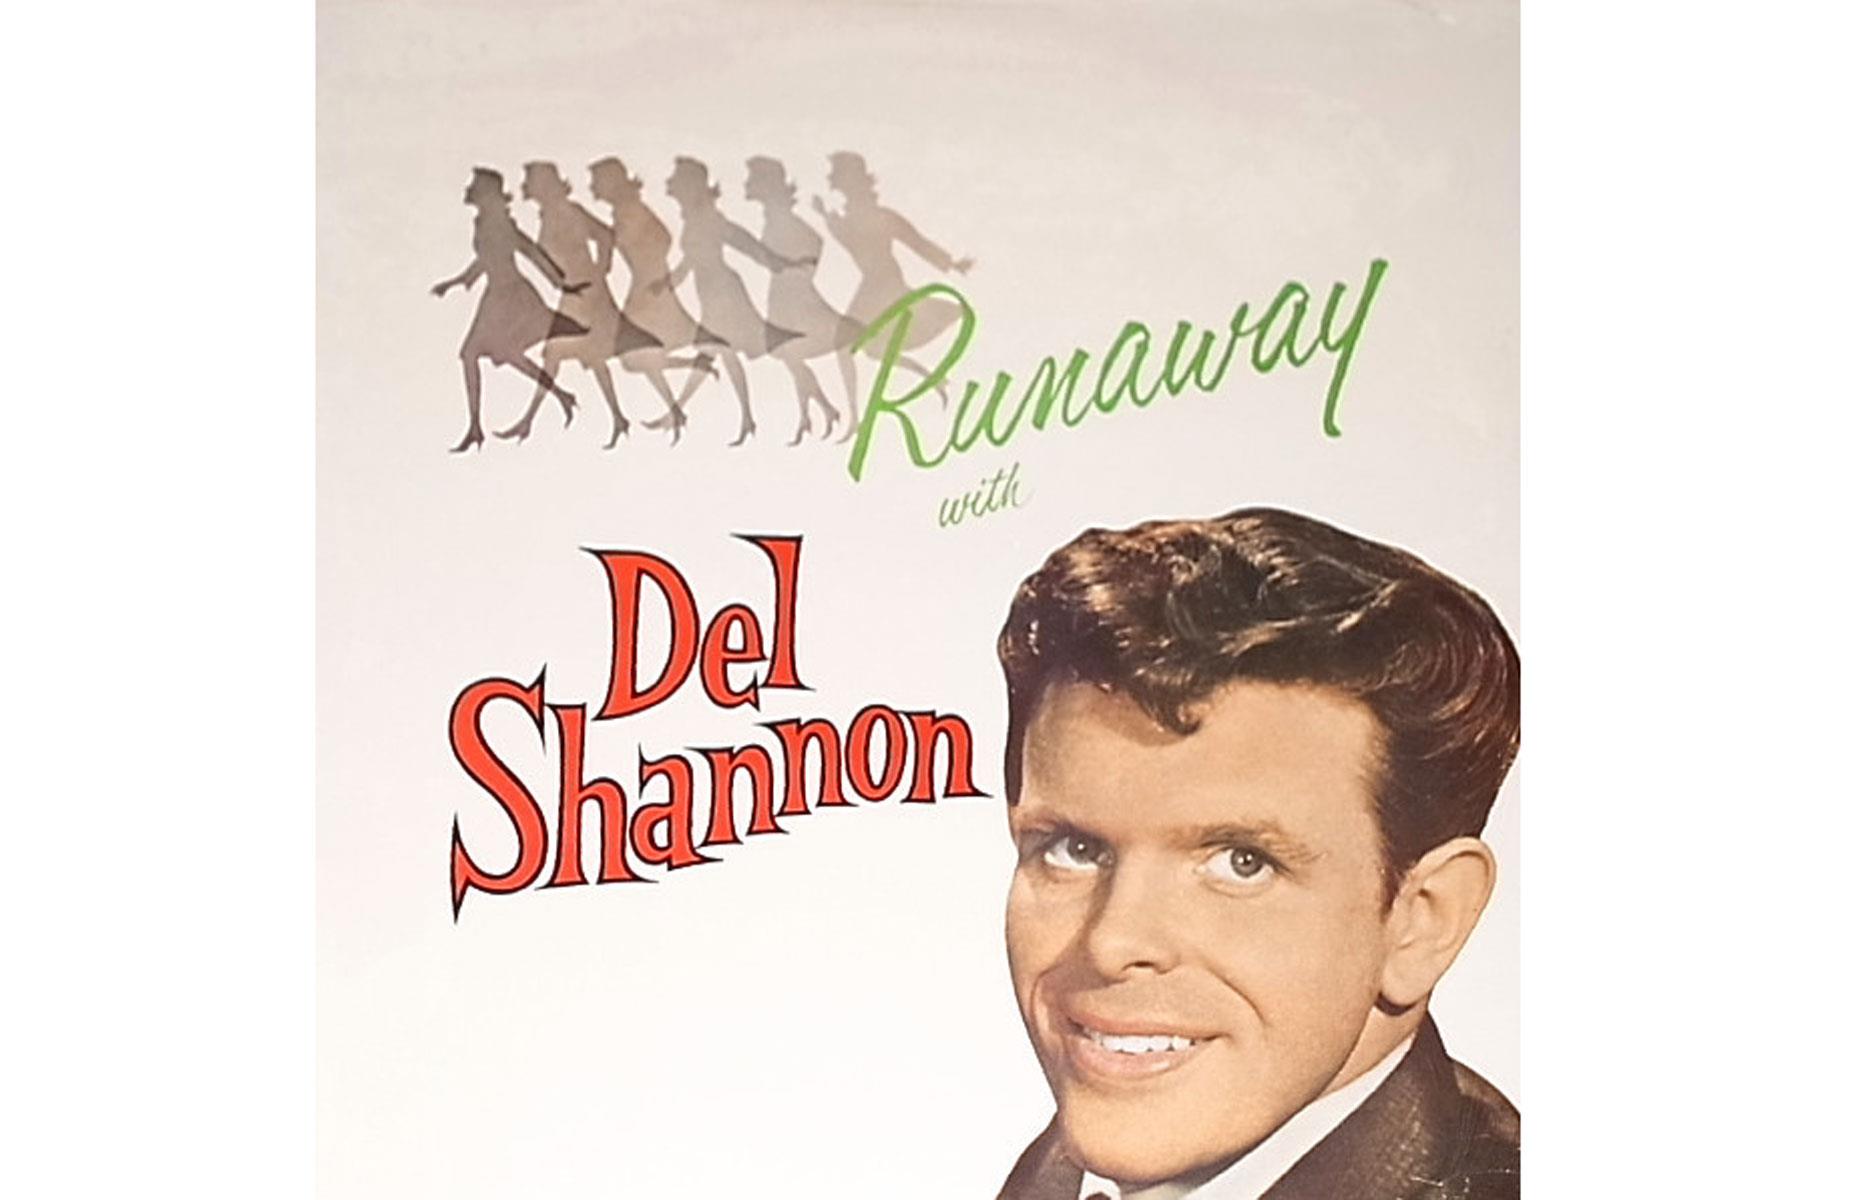 Del Shannon – Runaway with... : up to $3,700 (£3,144)